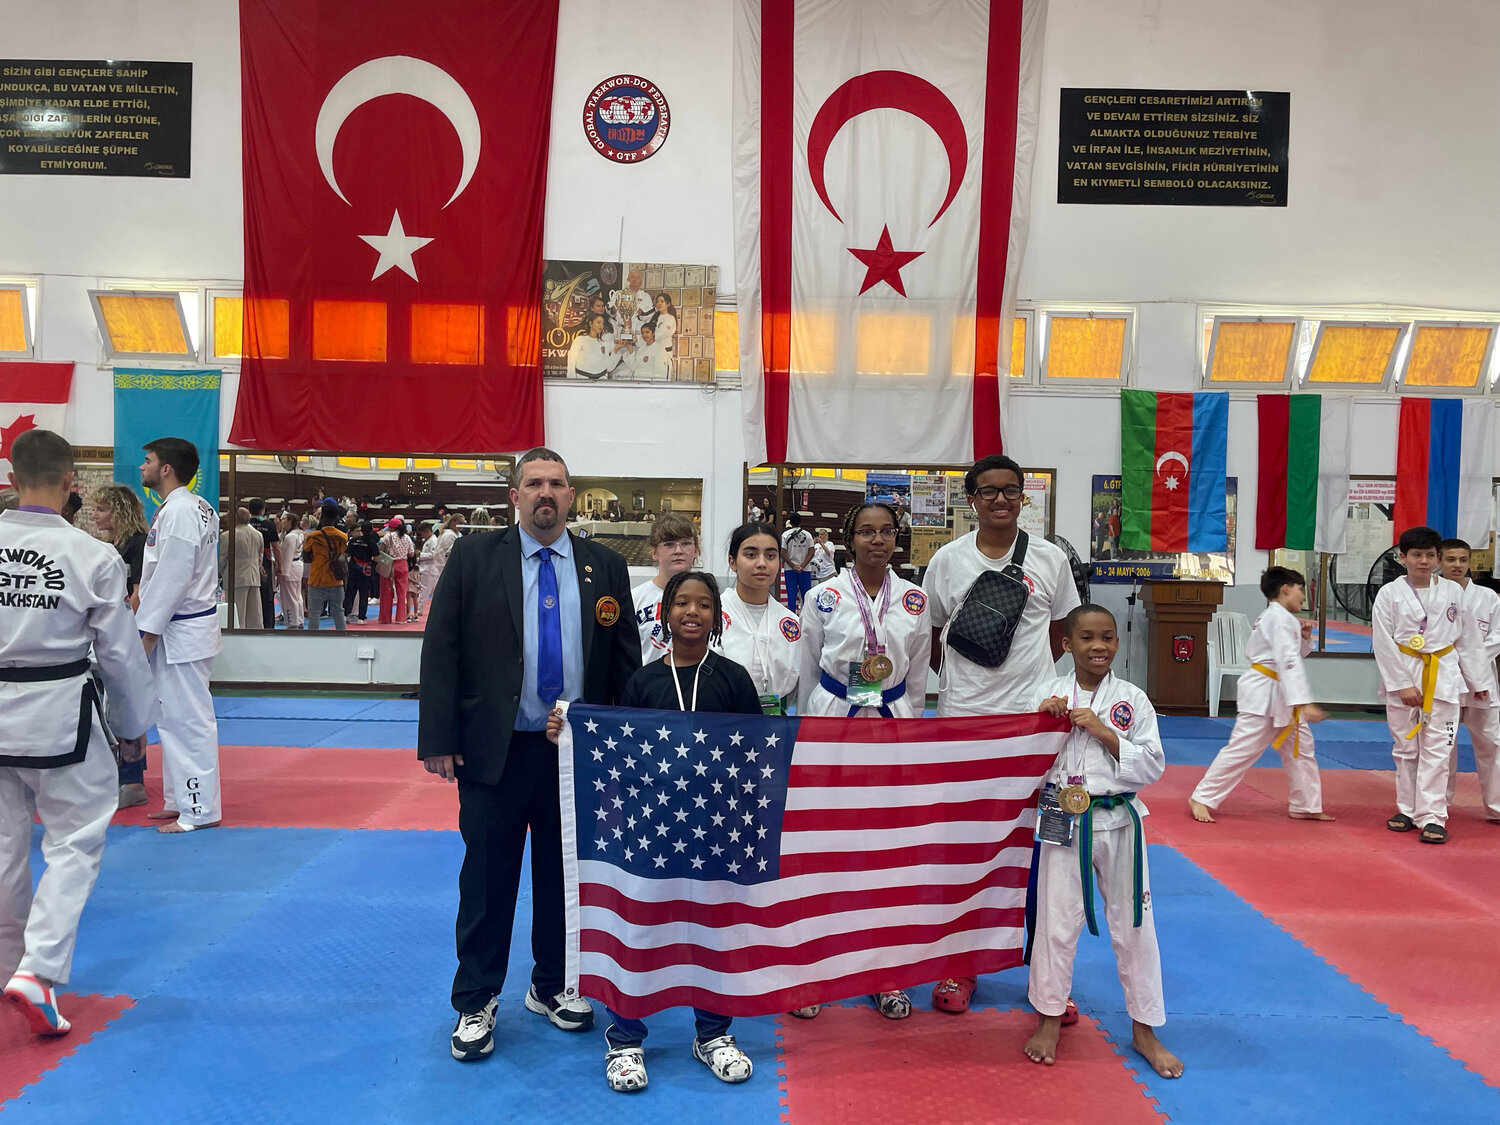 A group of Smryna martial artists competed at the Global Taekwon-Do Federation World Championship in the Turkish Republic of Northern Cyprus. They included Master Anthony Skinner, Salma Omaid, Ryland Fuller, Darius Raines, Logan Sahn, Brooklynn Jones and Baylie Cerutti.